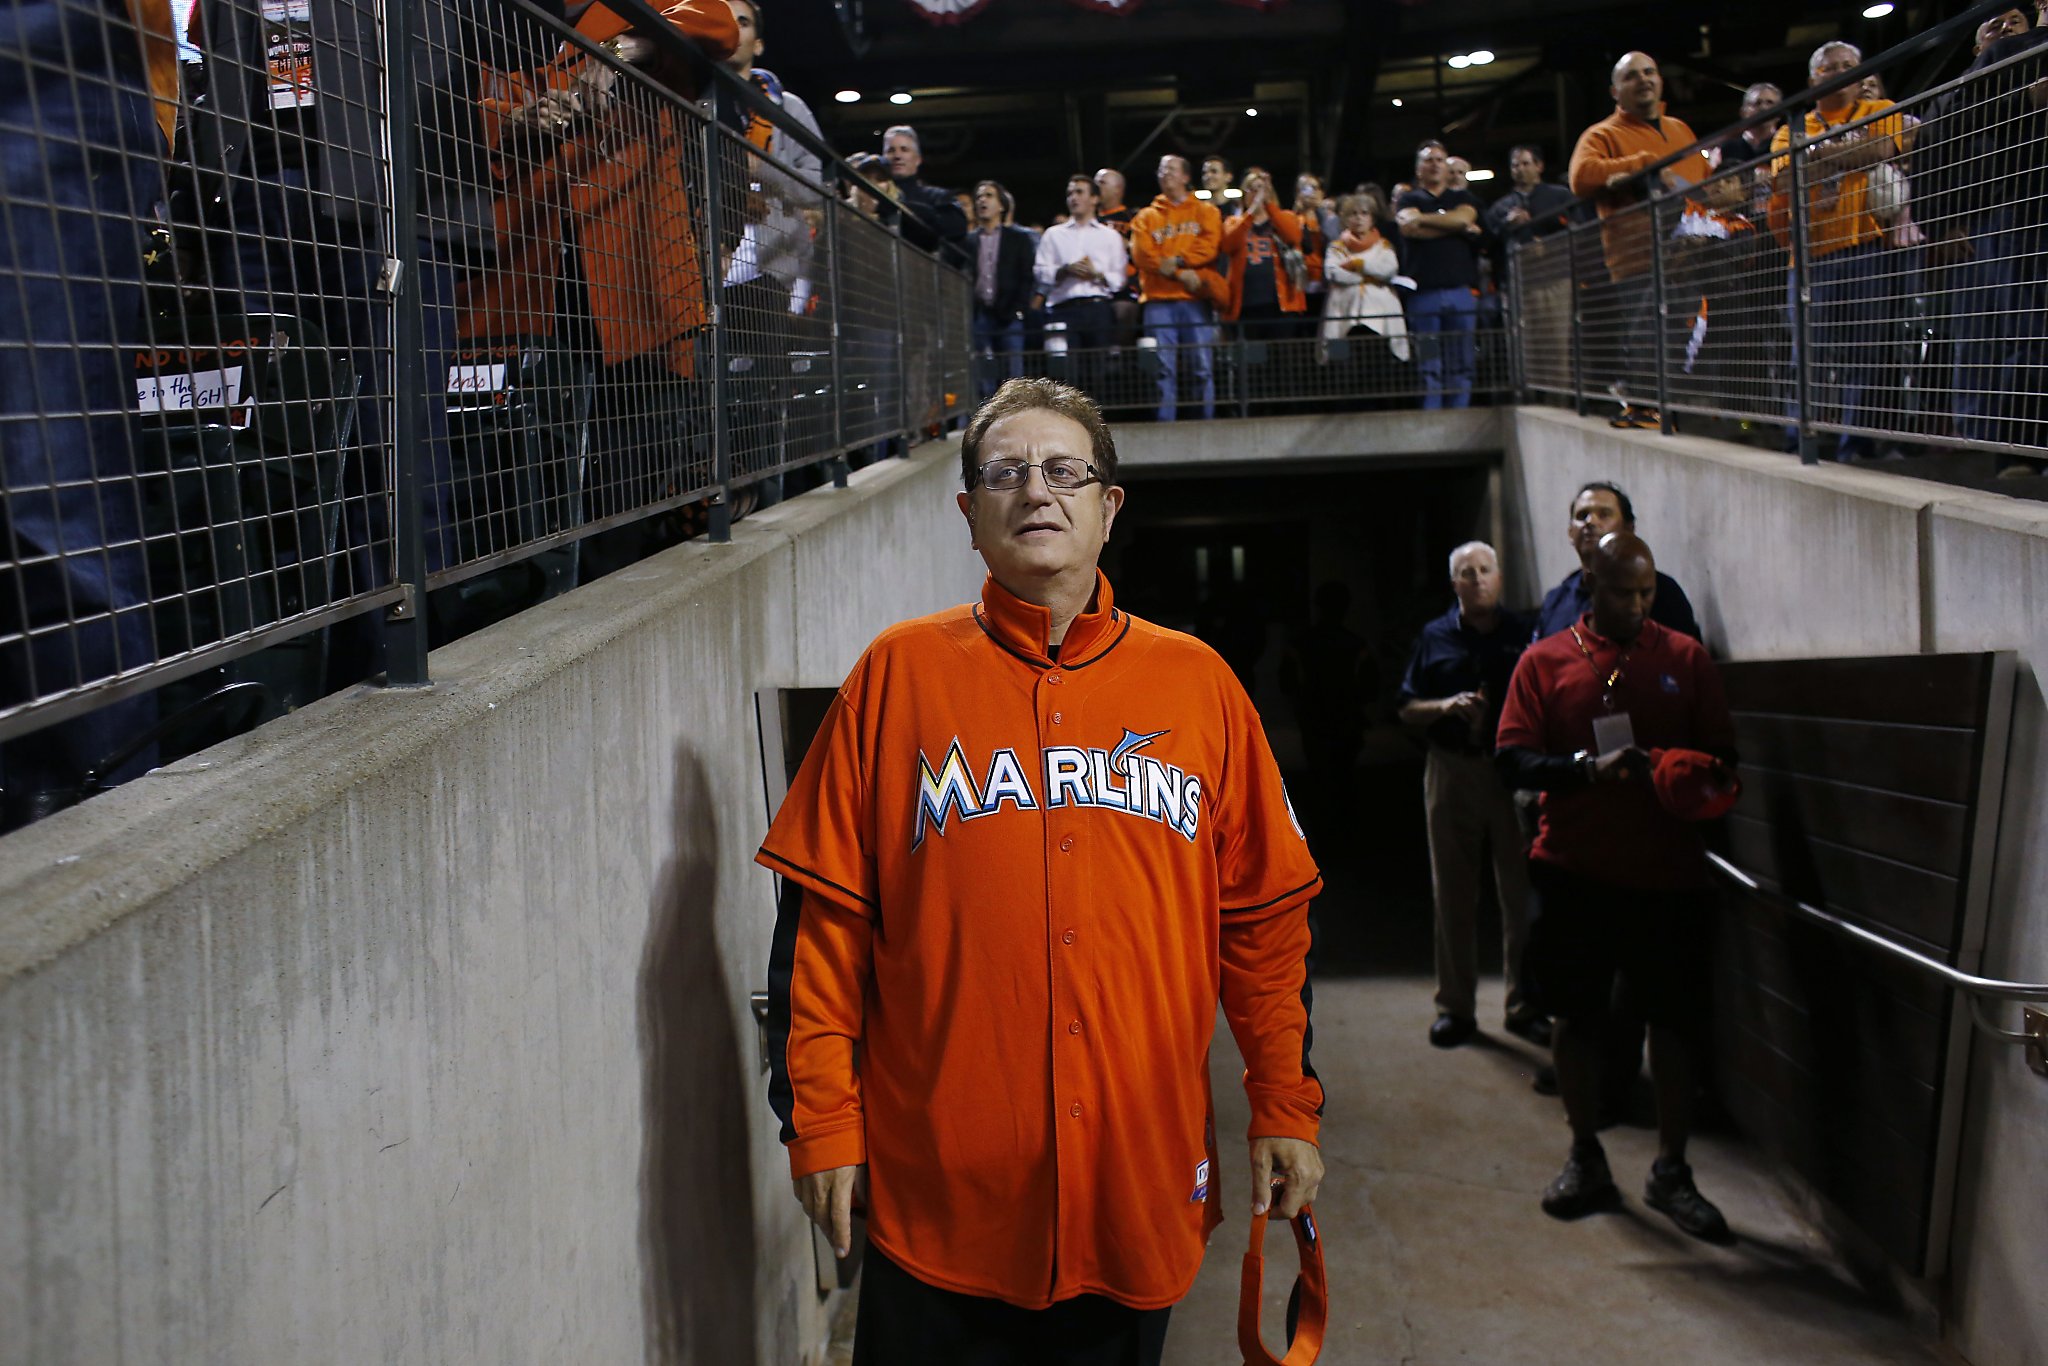 Self-promoting 'Marlins Man' drawing attention at AT&T Park